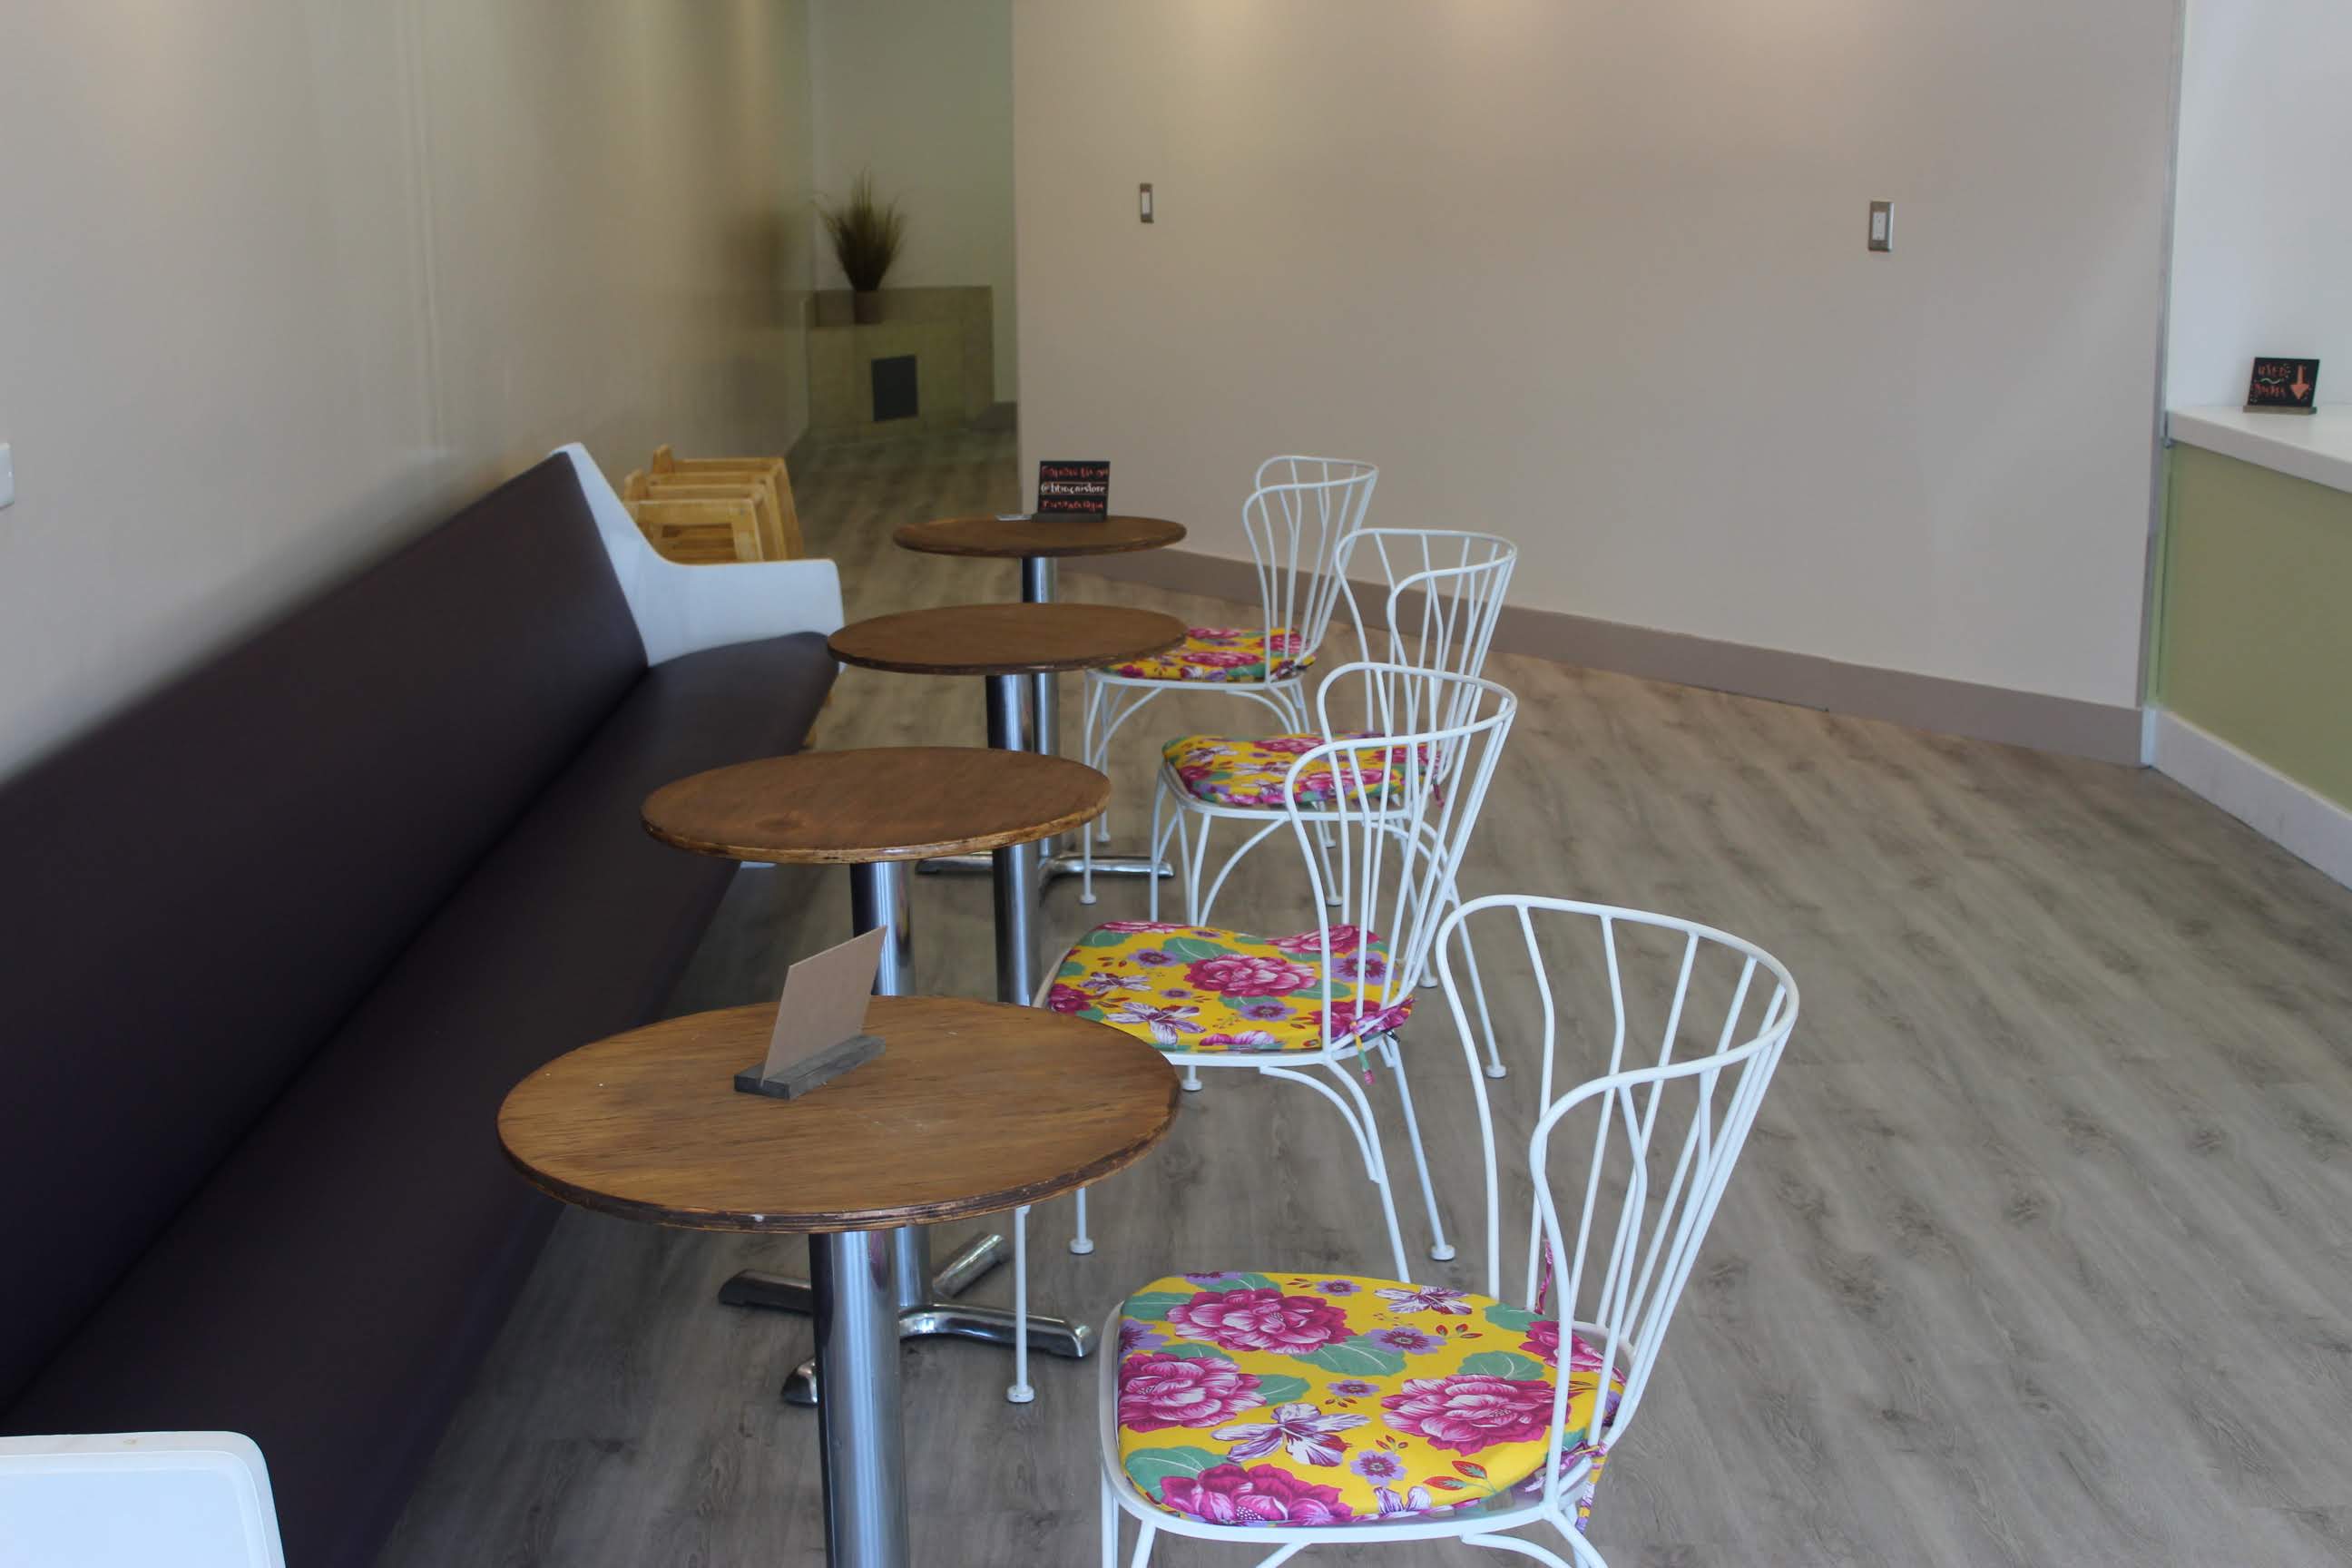 The seating and design of the shop. Credit: Abby Sourwine / The Foothill Dragon Press